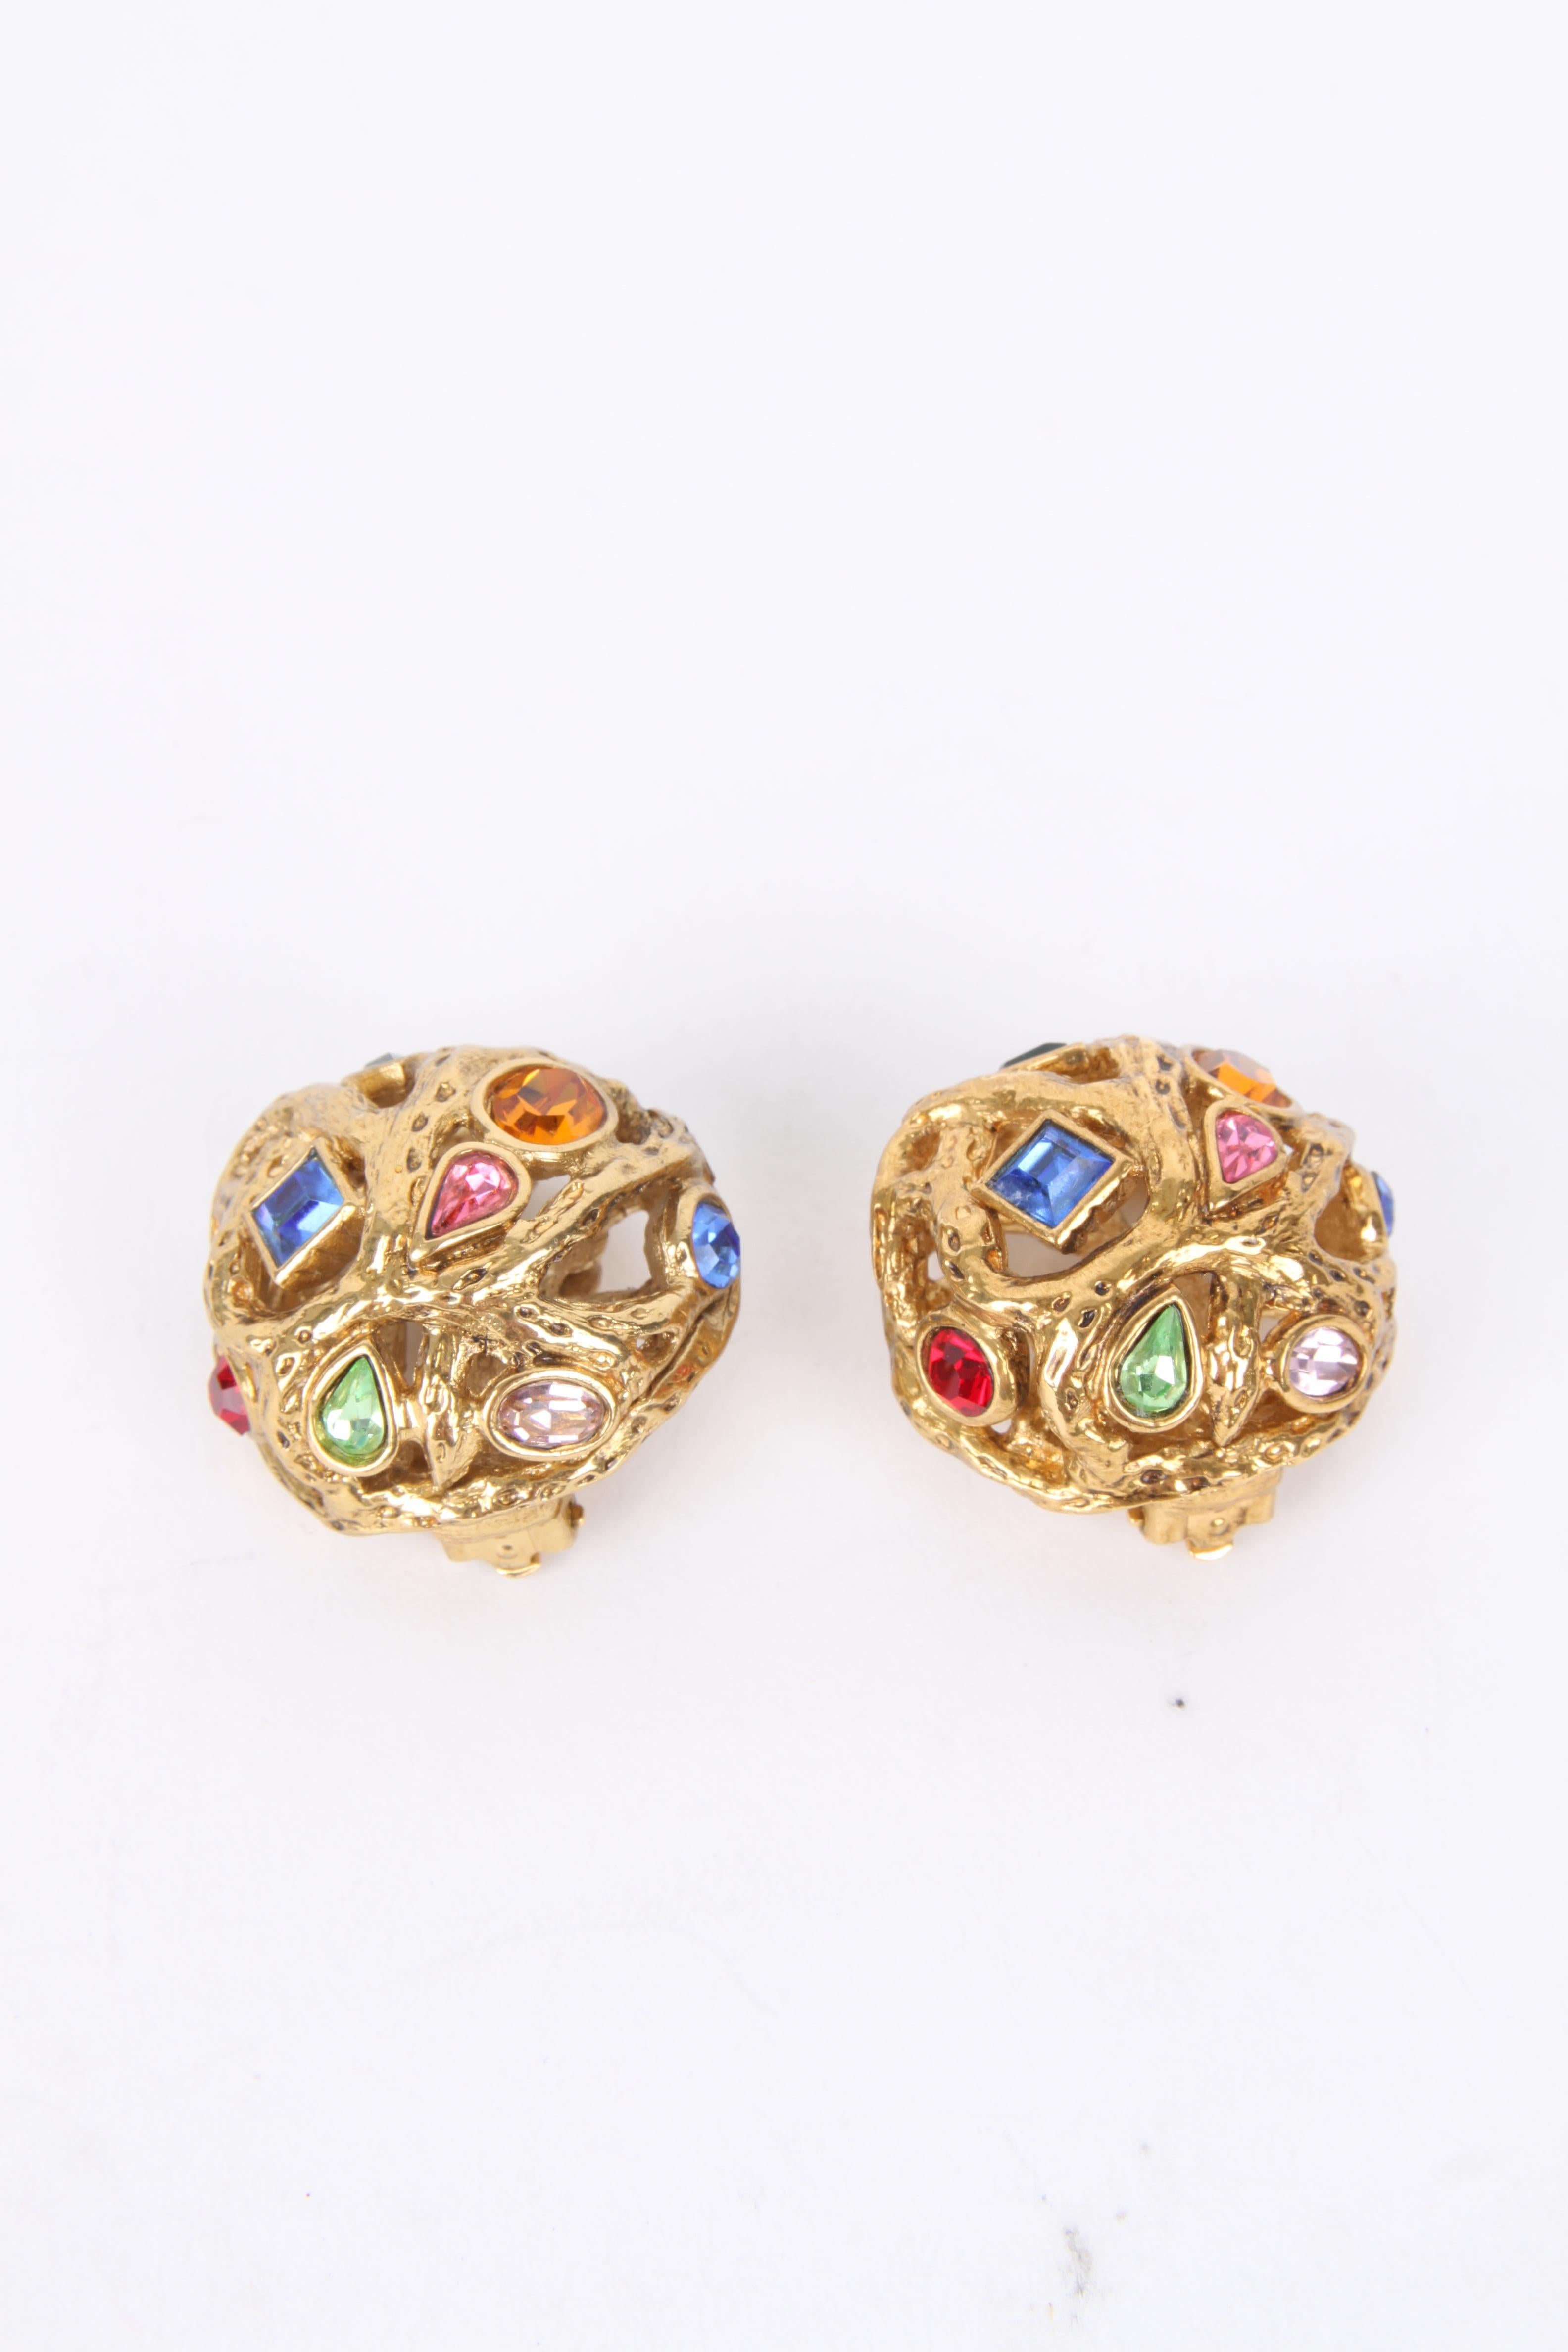 Yves Saint Laurent by Robert Goossens Gold Multicolour Rhinestone Clip-On Earrings

These earrings feature a lux gold-plated openwork exterior with a red/orange/pink/blue and green rhinestone embellished finish. The earrings feature a gold-plated